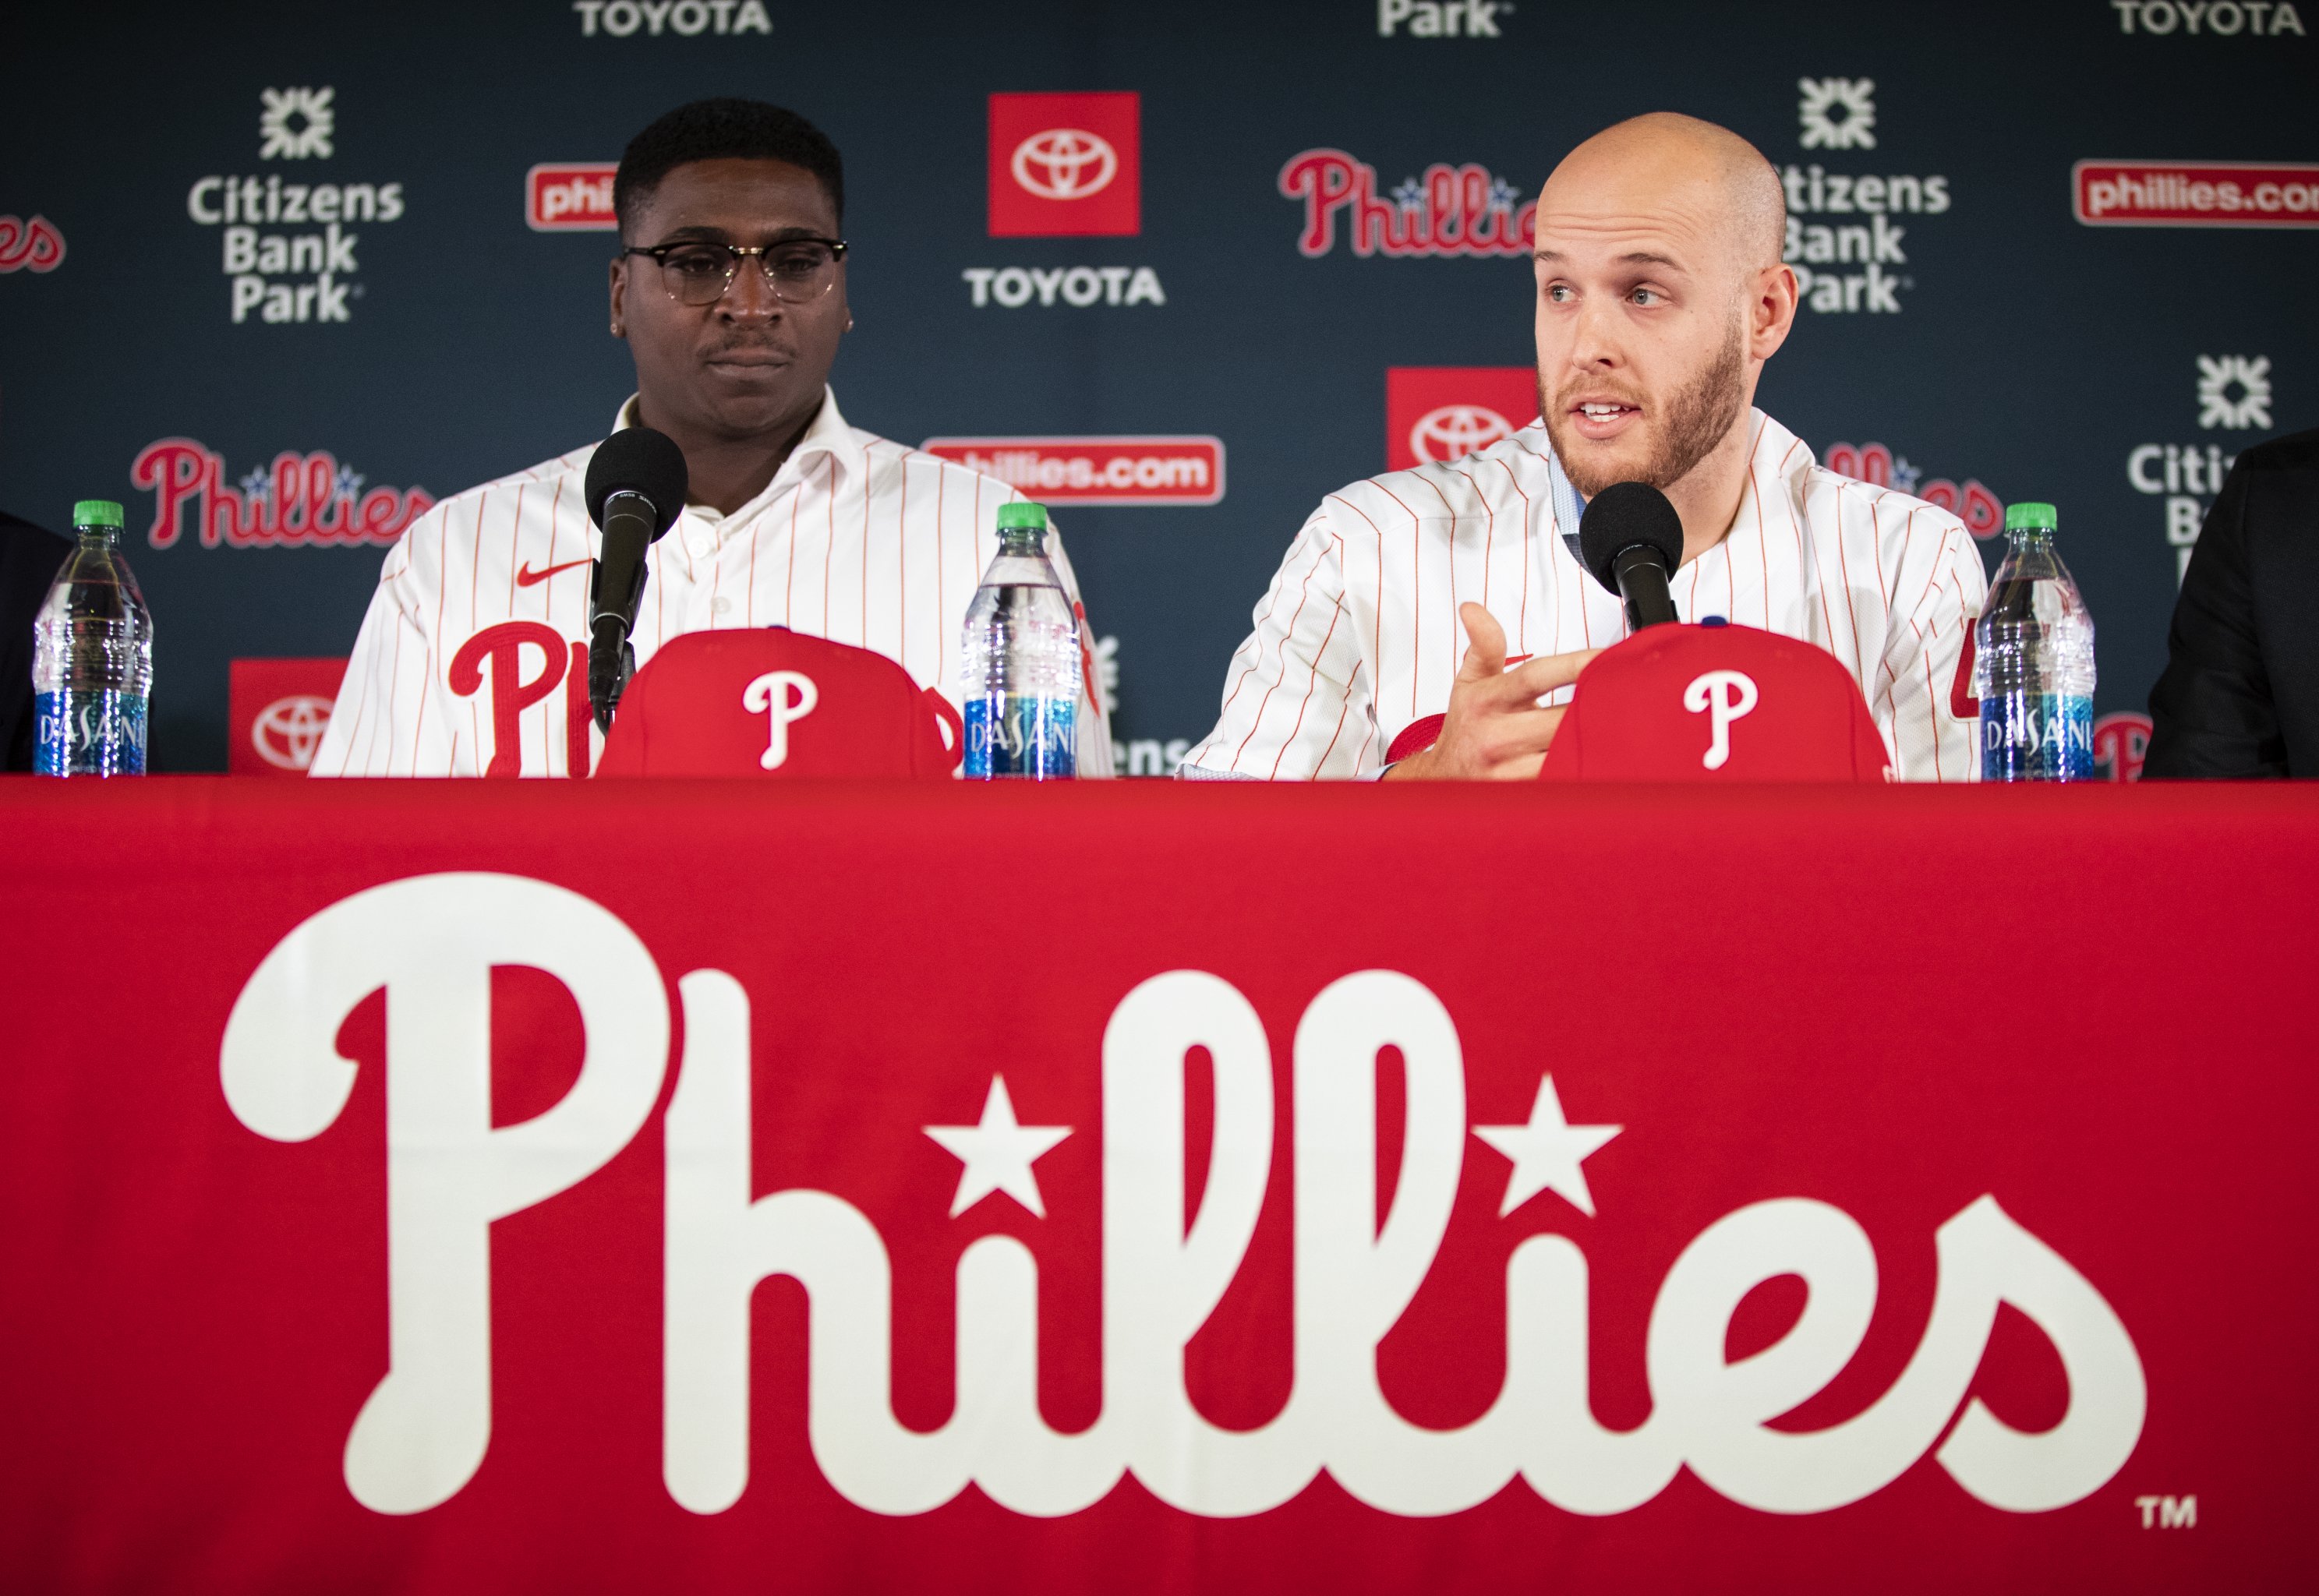 Pedro Martinez sharp in debut (at press conference) for Phillies